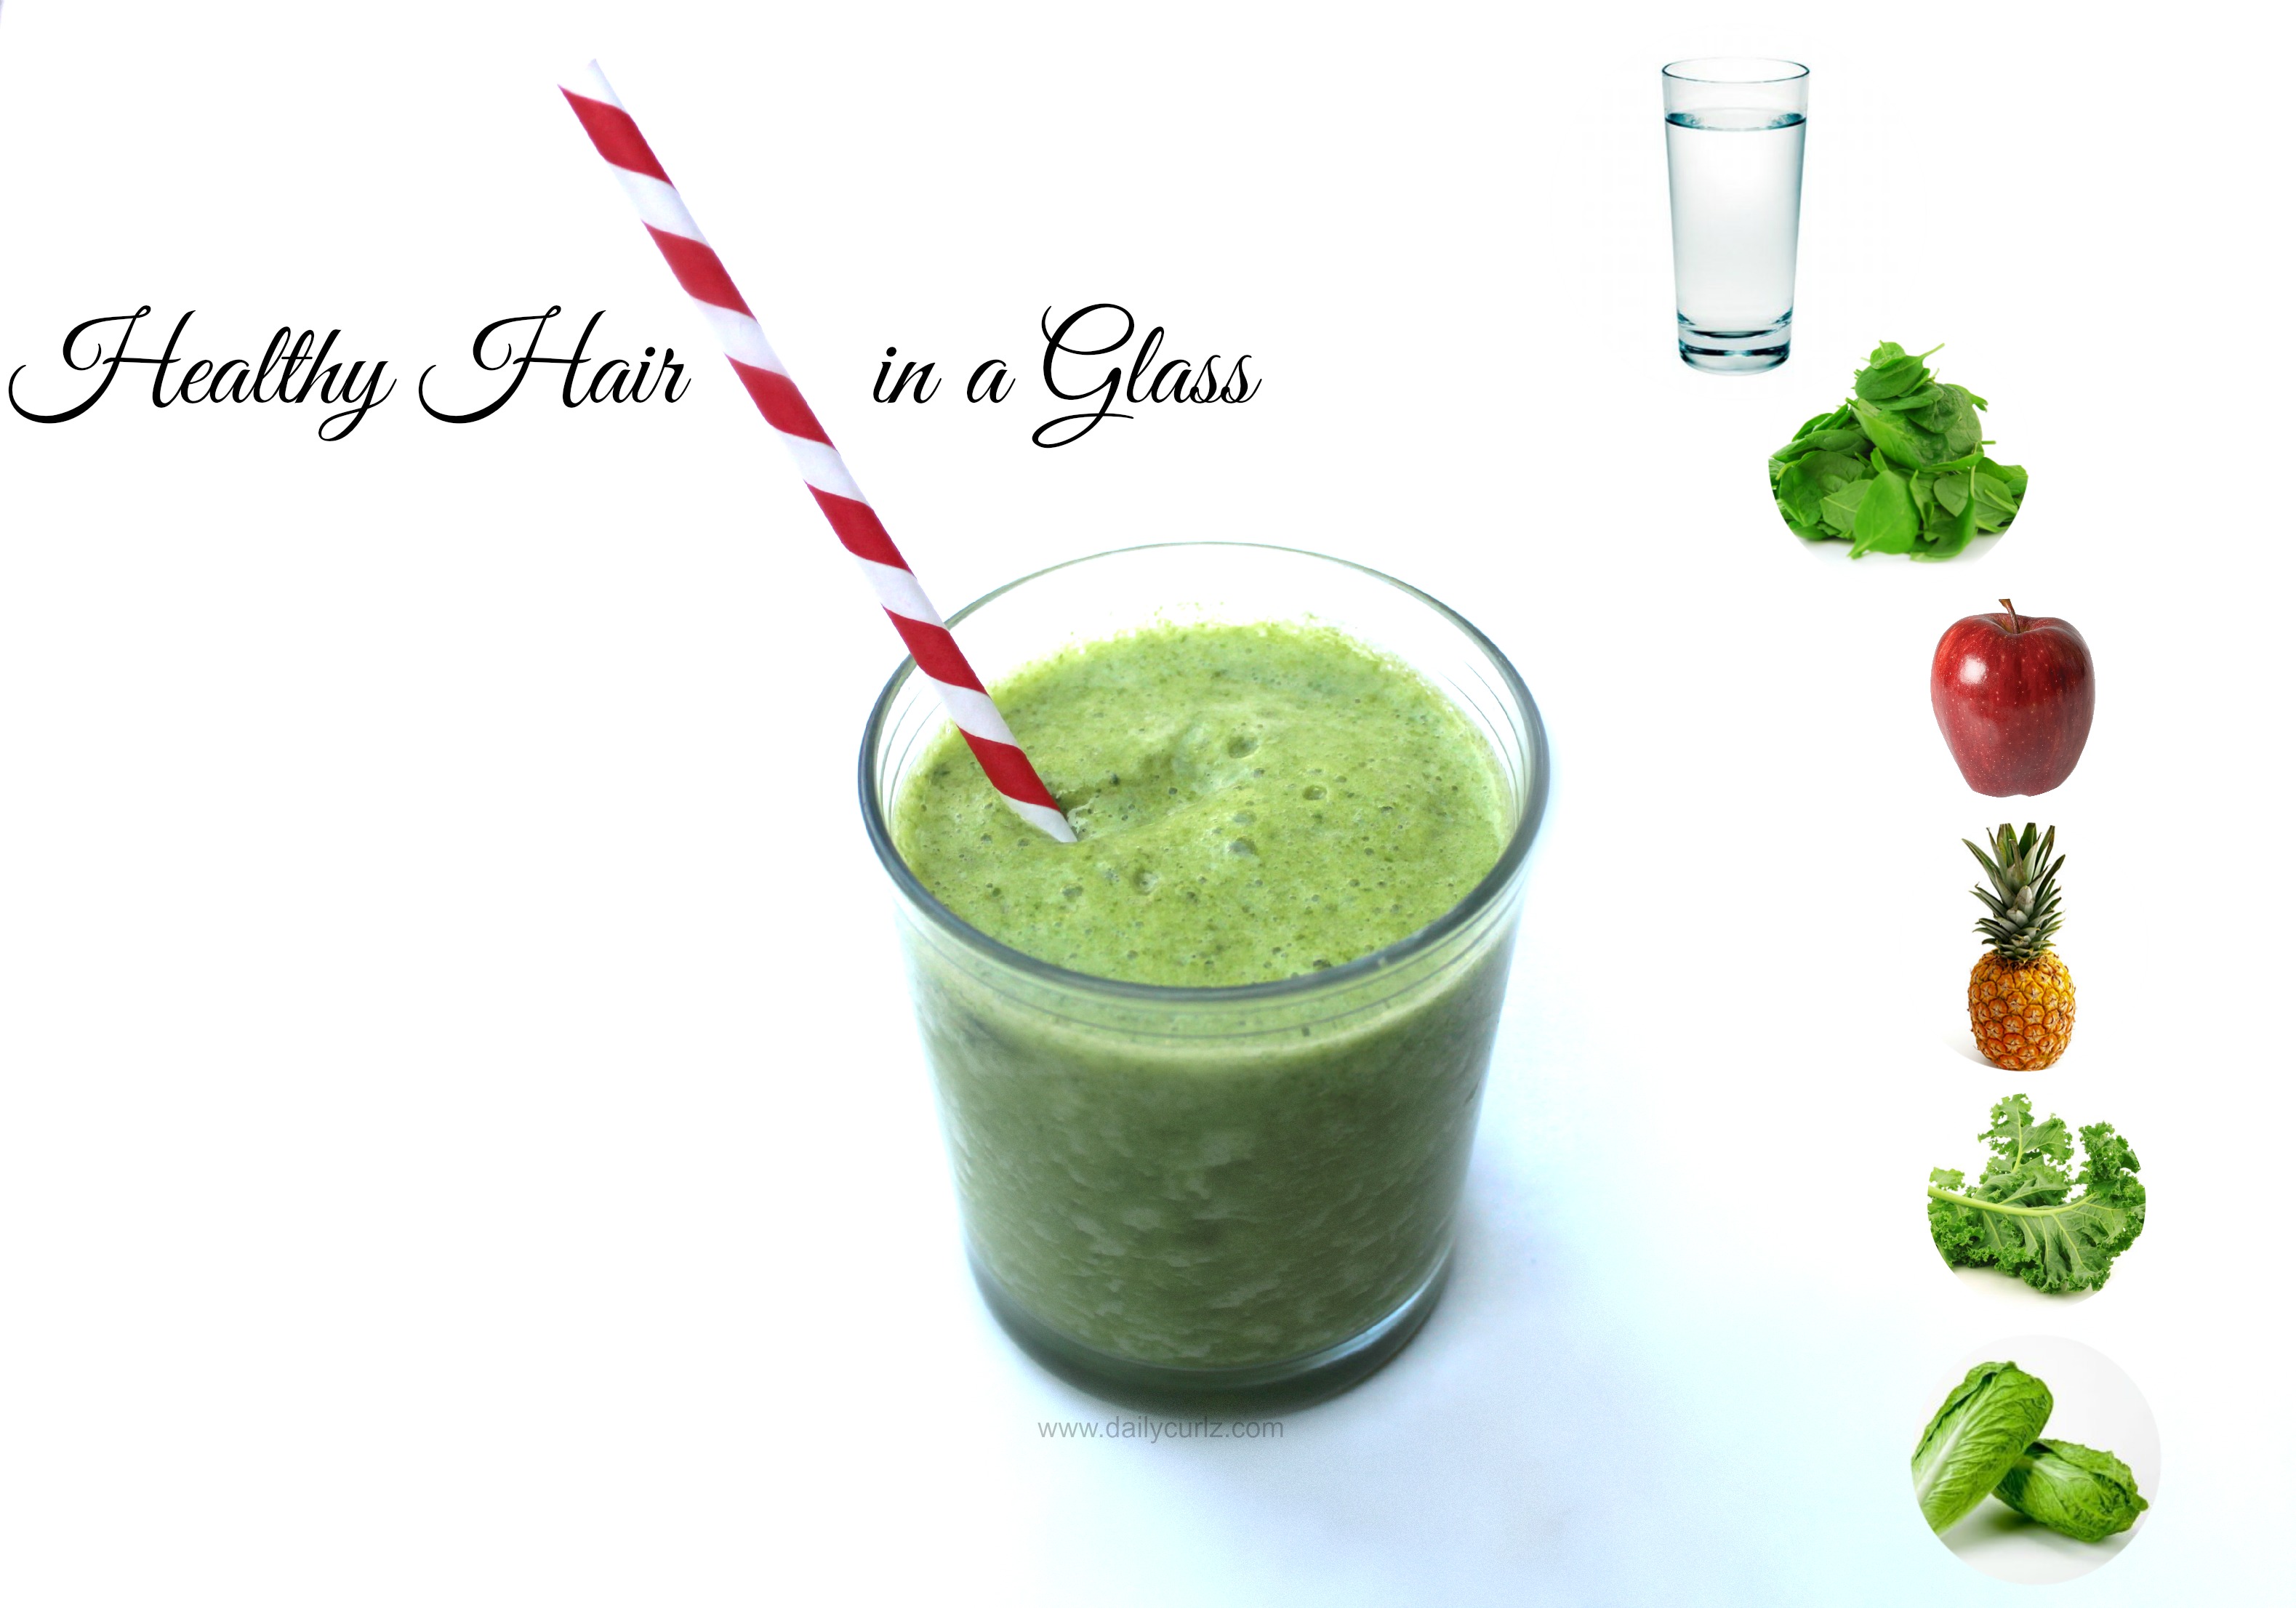 Healthy hair in a glass / Cabello saludable para llevar